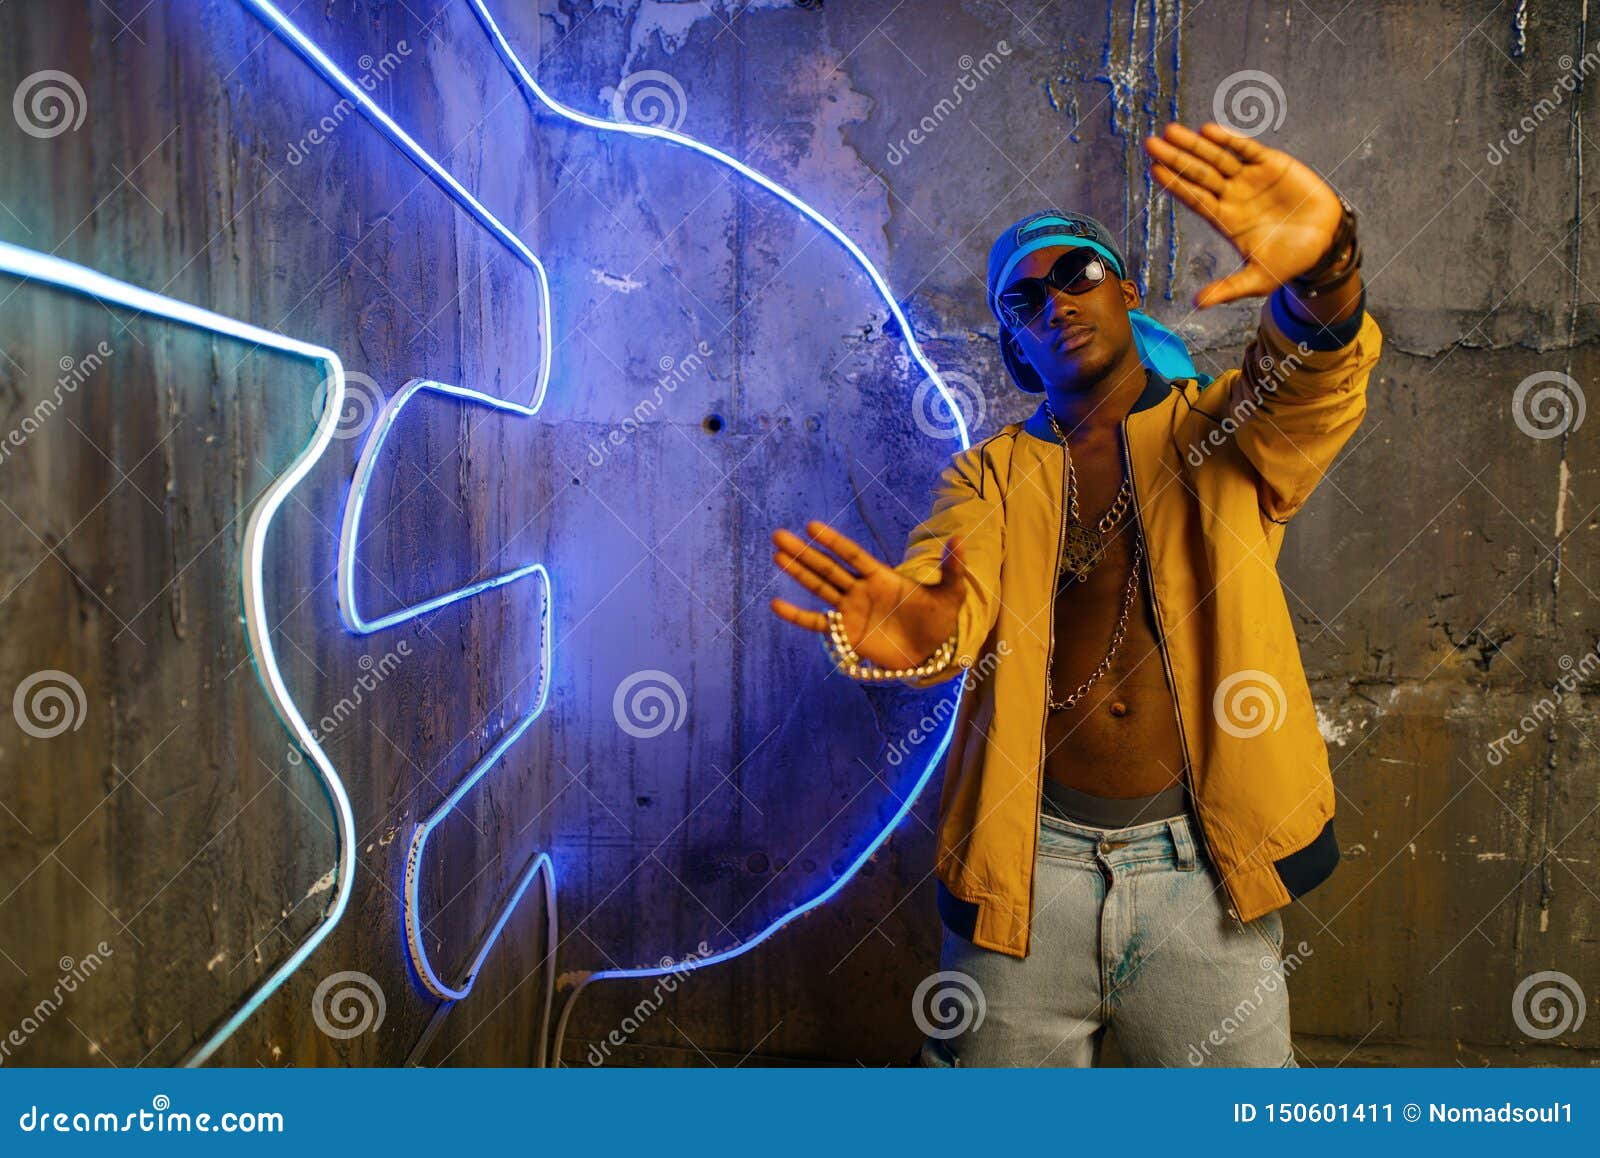 Black Rapper in Underpass Neon Light on Background Stock Image - Image ...